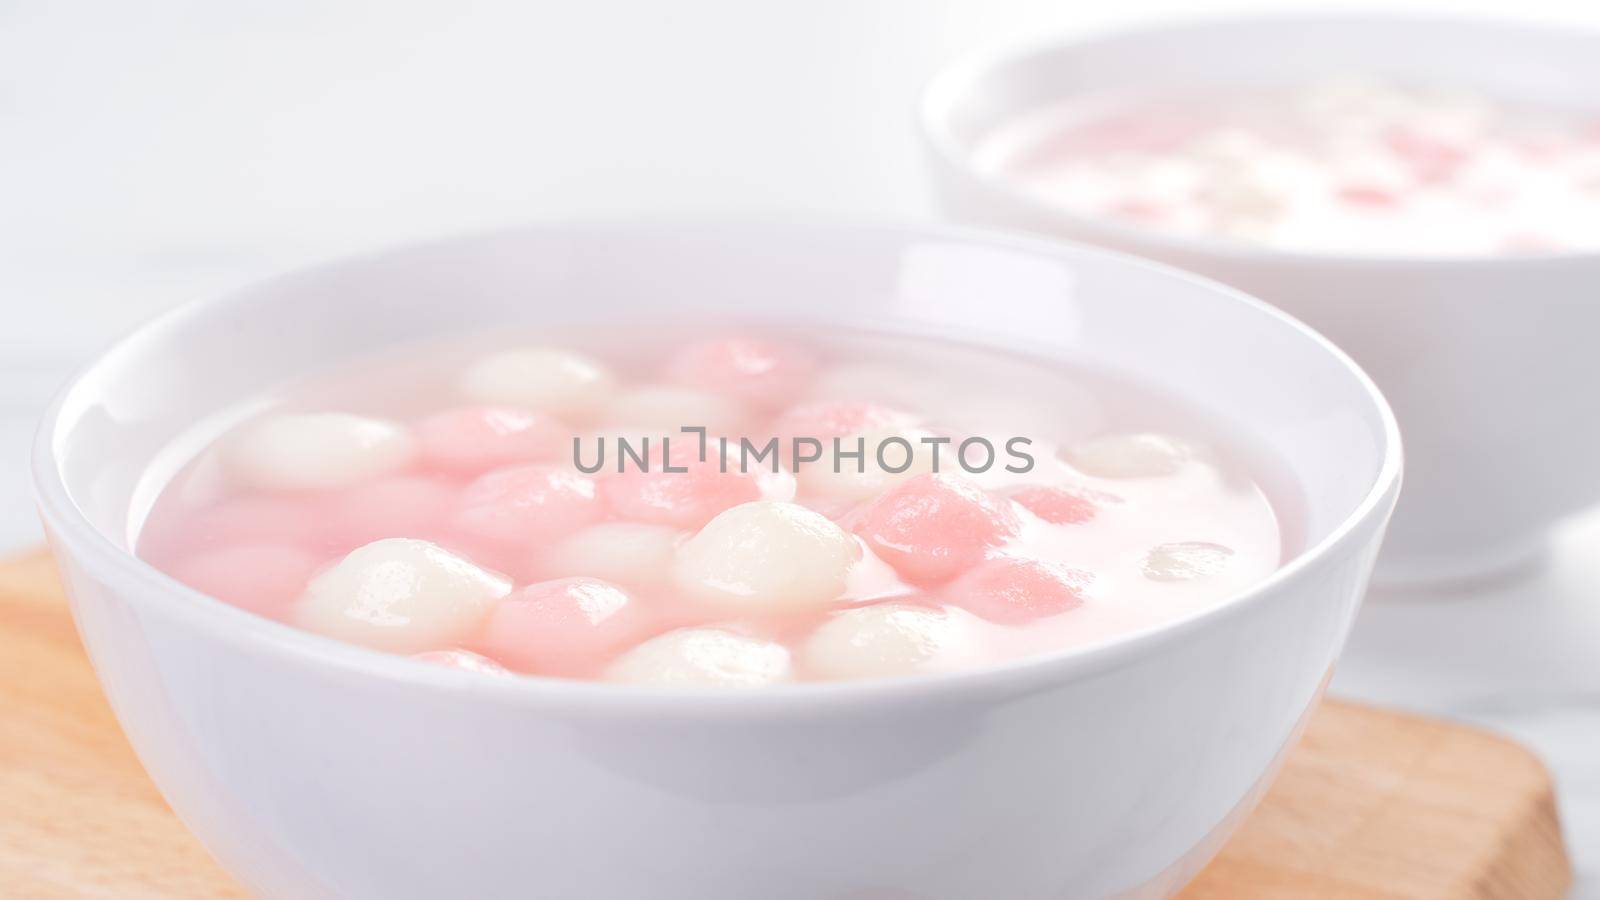 Tang yuan, tangyuan, delicious red and white rice dumpling balls in a small bowl. Asian traditional festive food for Chinese Winter Solstice Festival, close up.